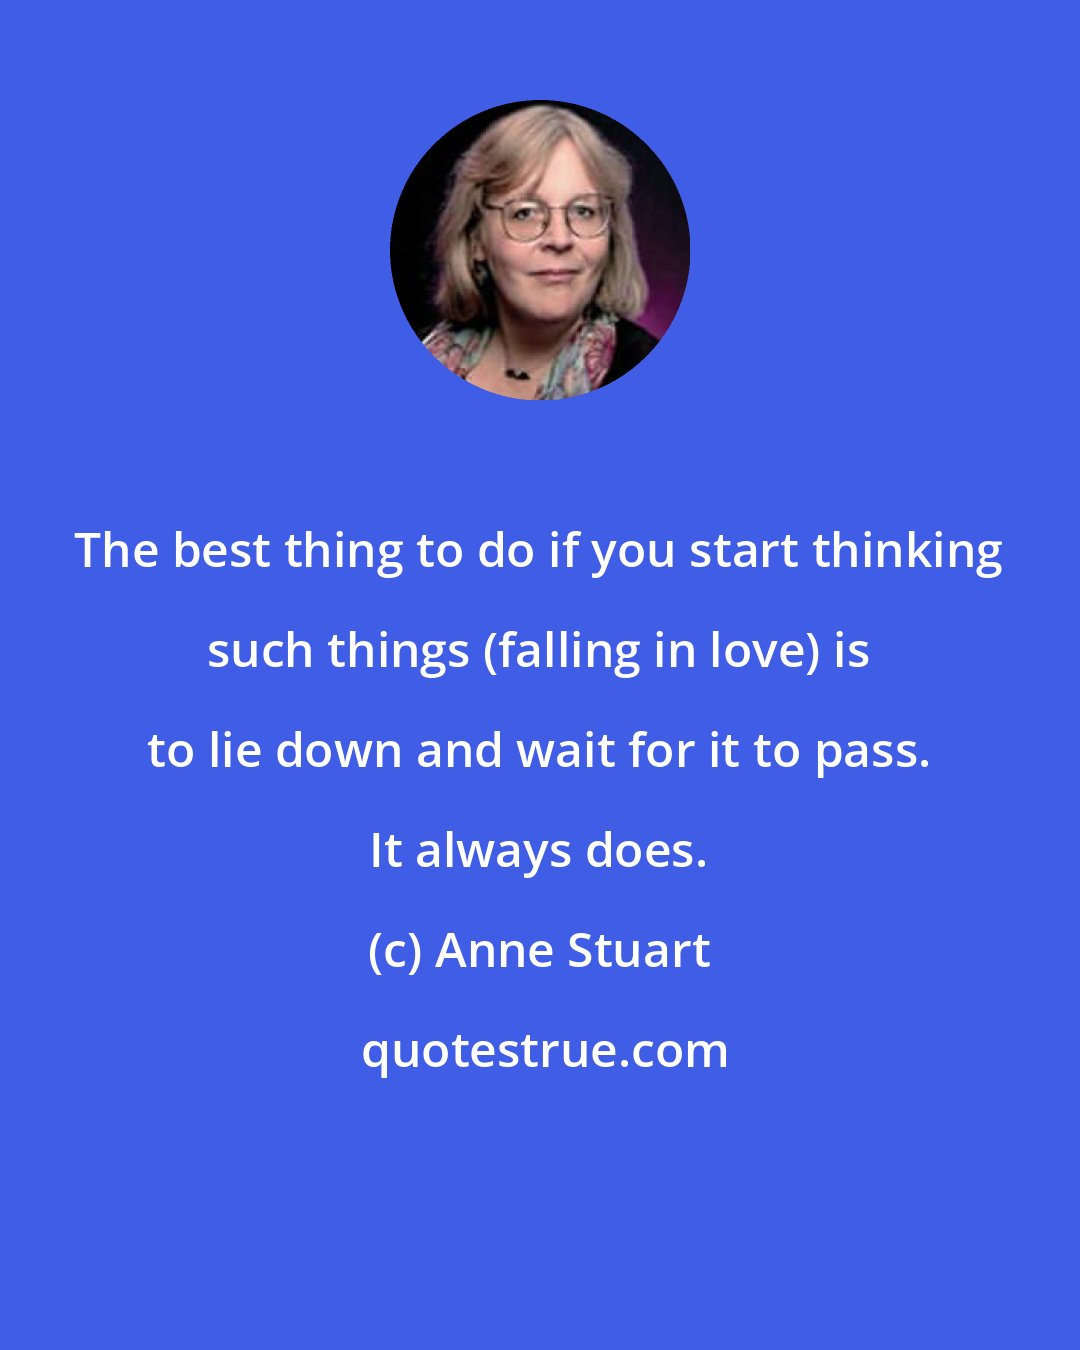 Anne Stuart: The best thing to do if you start thinking such things (falling in love) is to lie down and wait for it to pass. It always does.